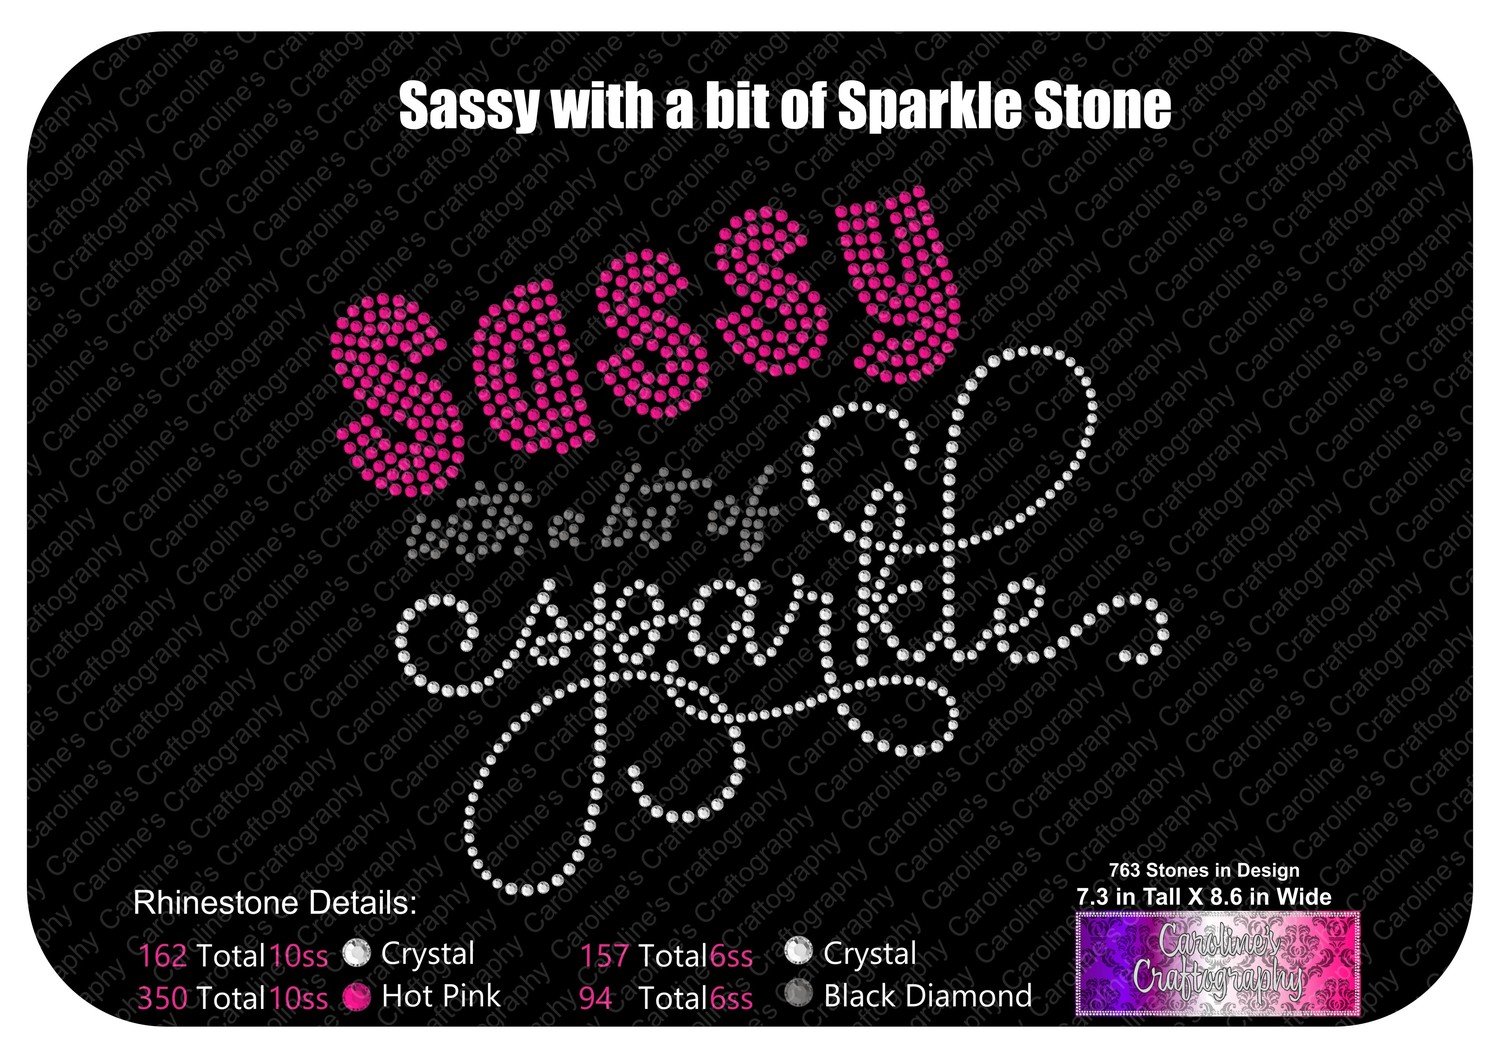 Sassy with a bit of sparkle Stone